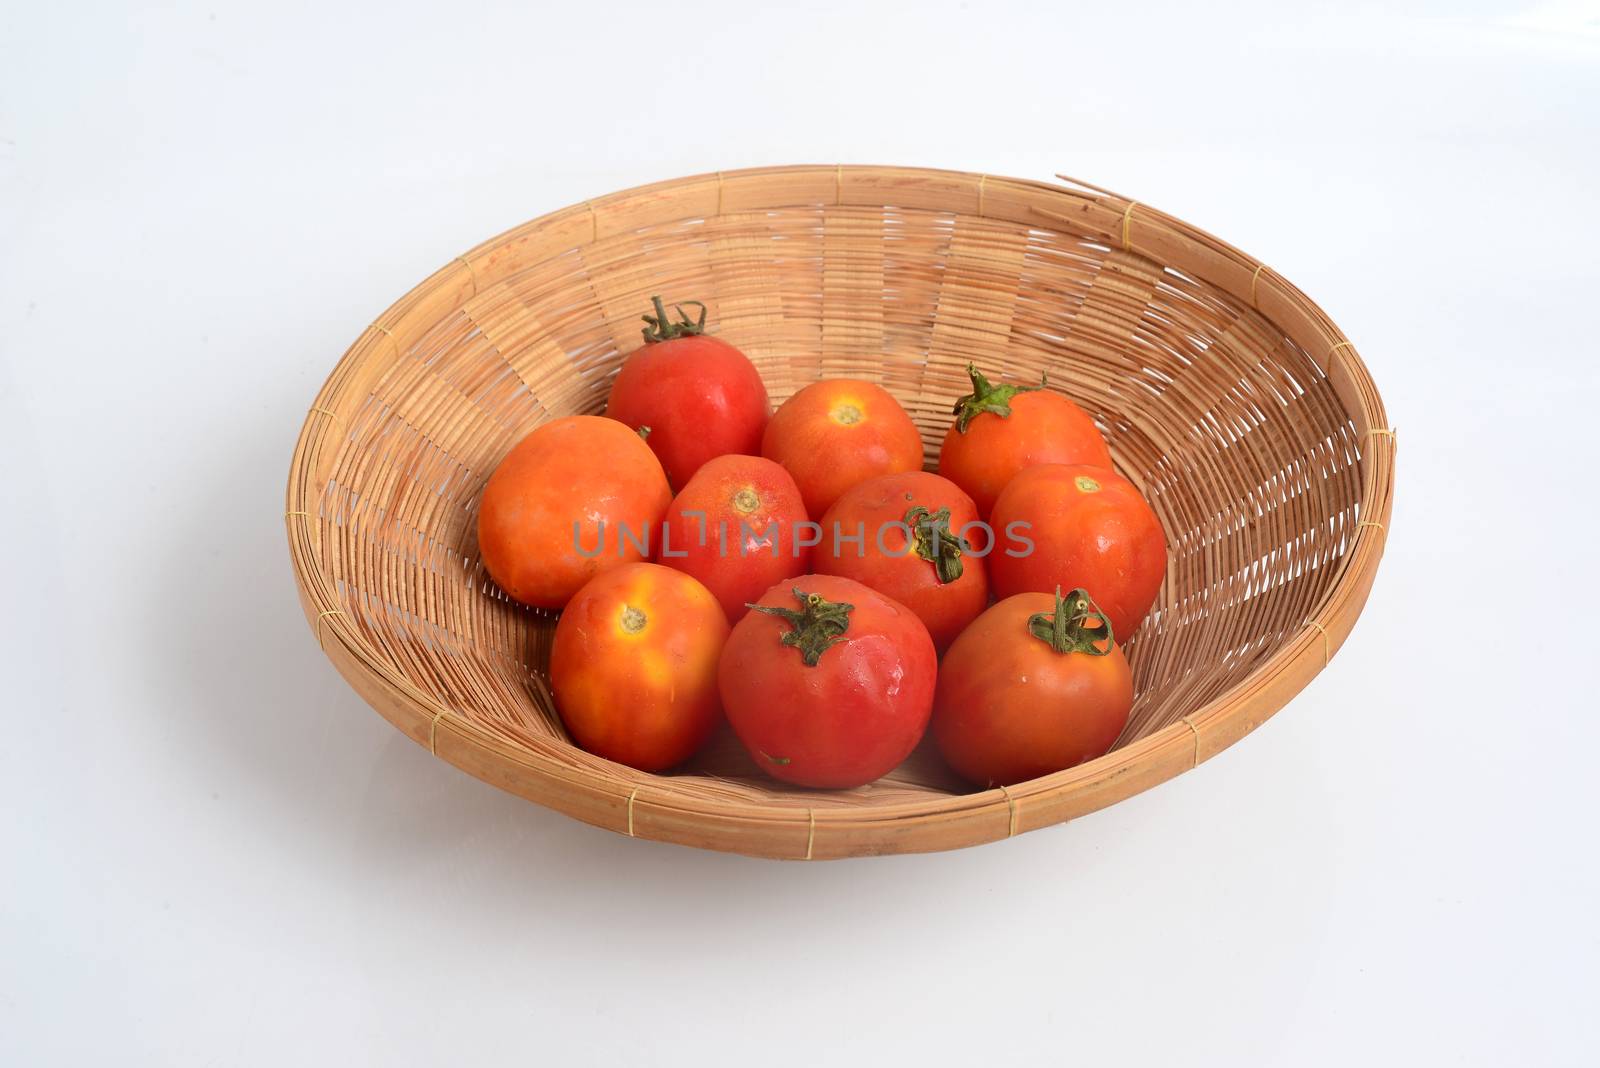 Tomato, (Solanum lycopersicum), flowering plant of the nightshade family (Solanaceae), cultivated extensively for its edible fruits. Labelled as a vegetable for nutritional purposes